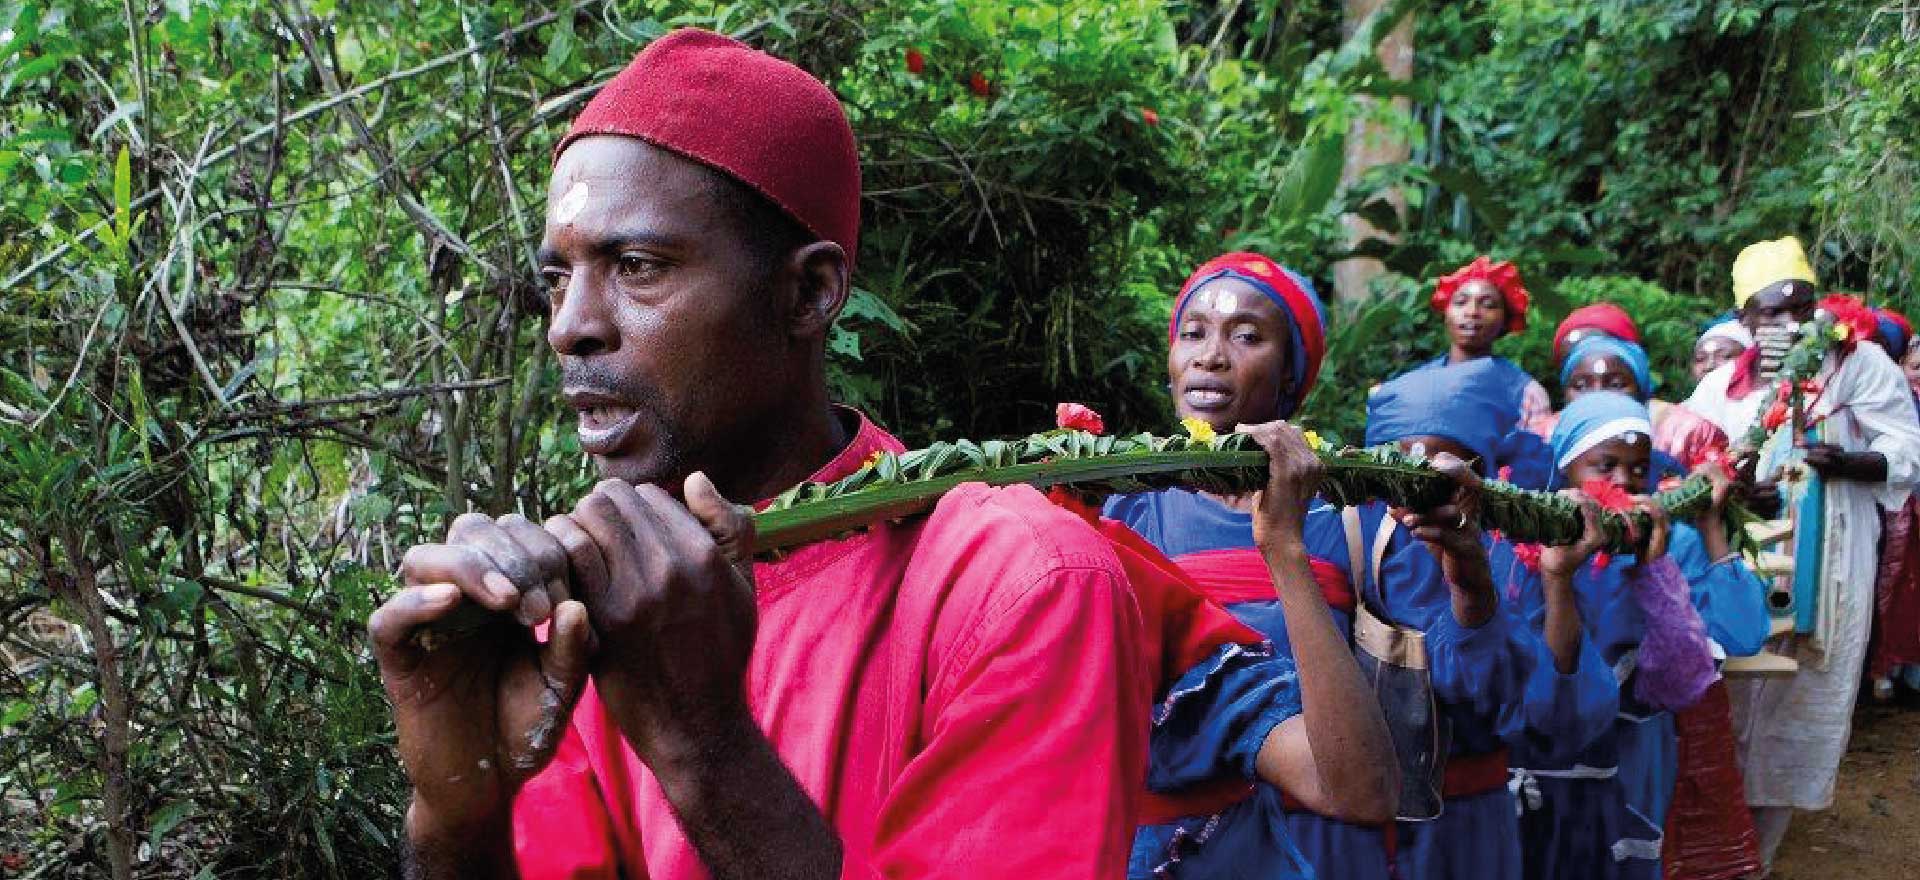 Cameroon holidays and tours - Bwiti ritual - Cameroon